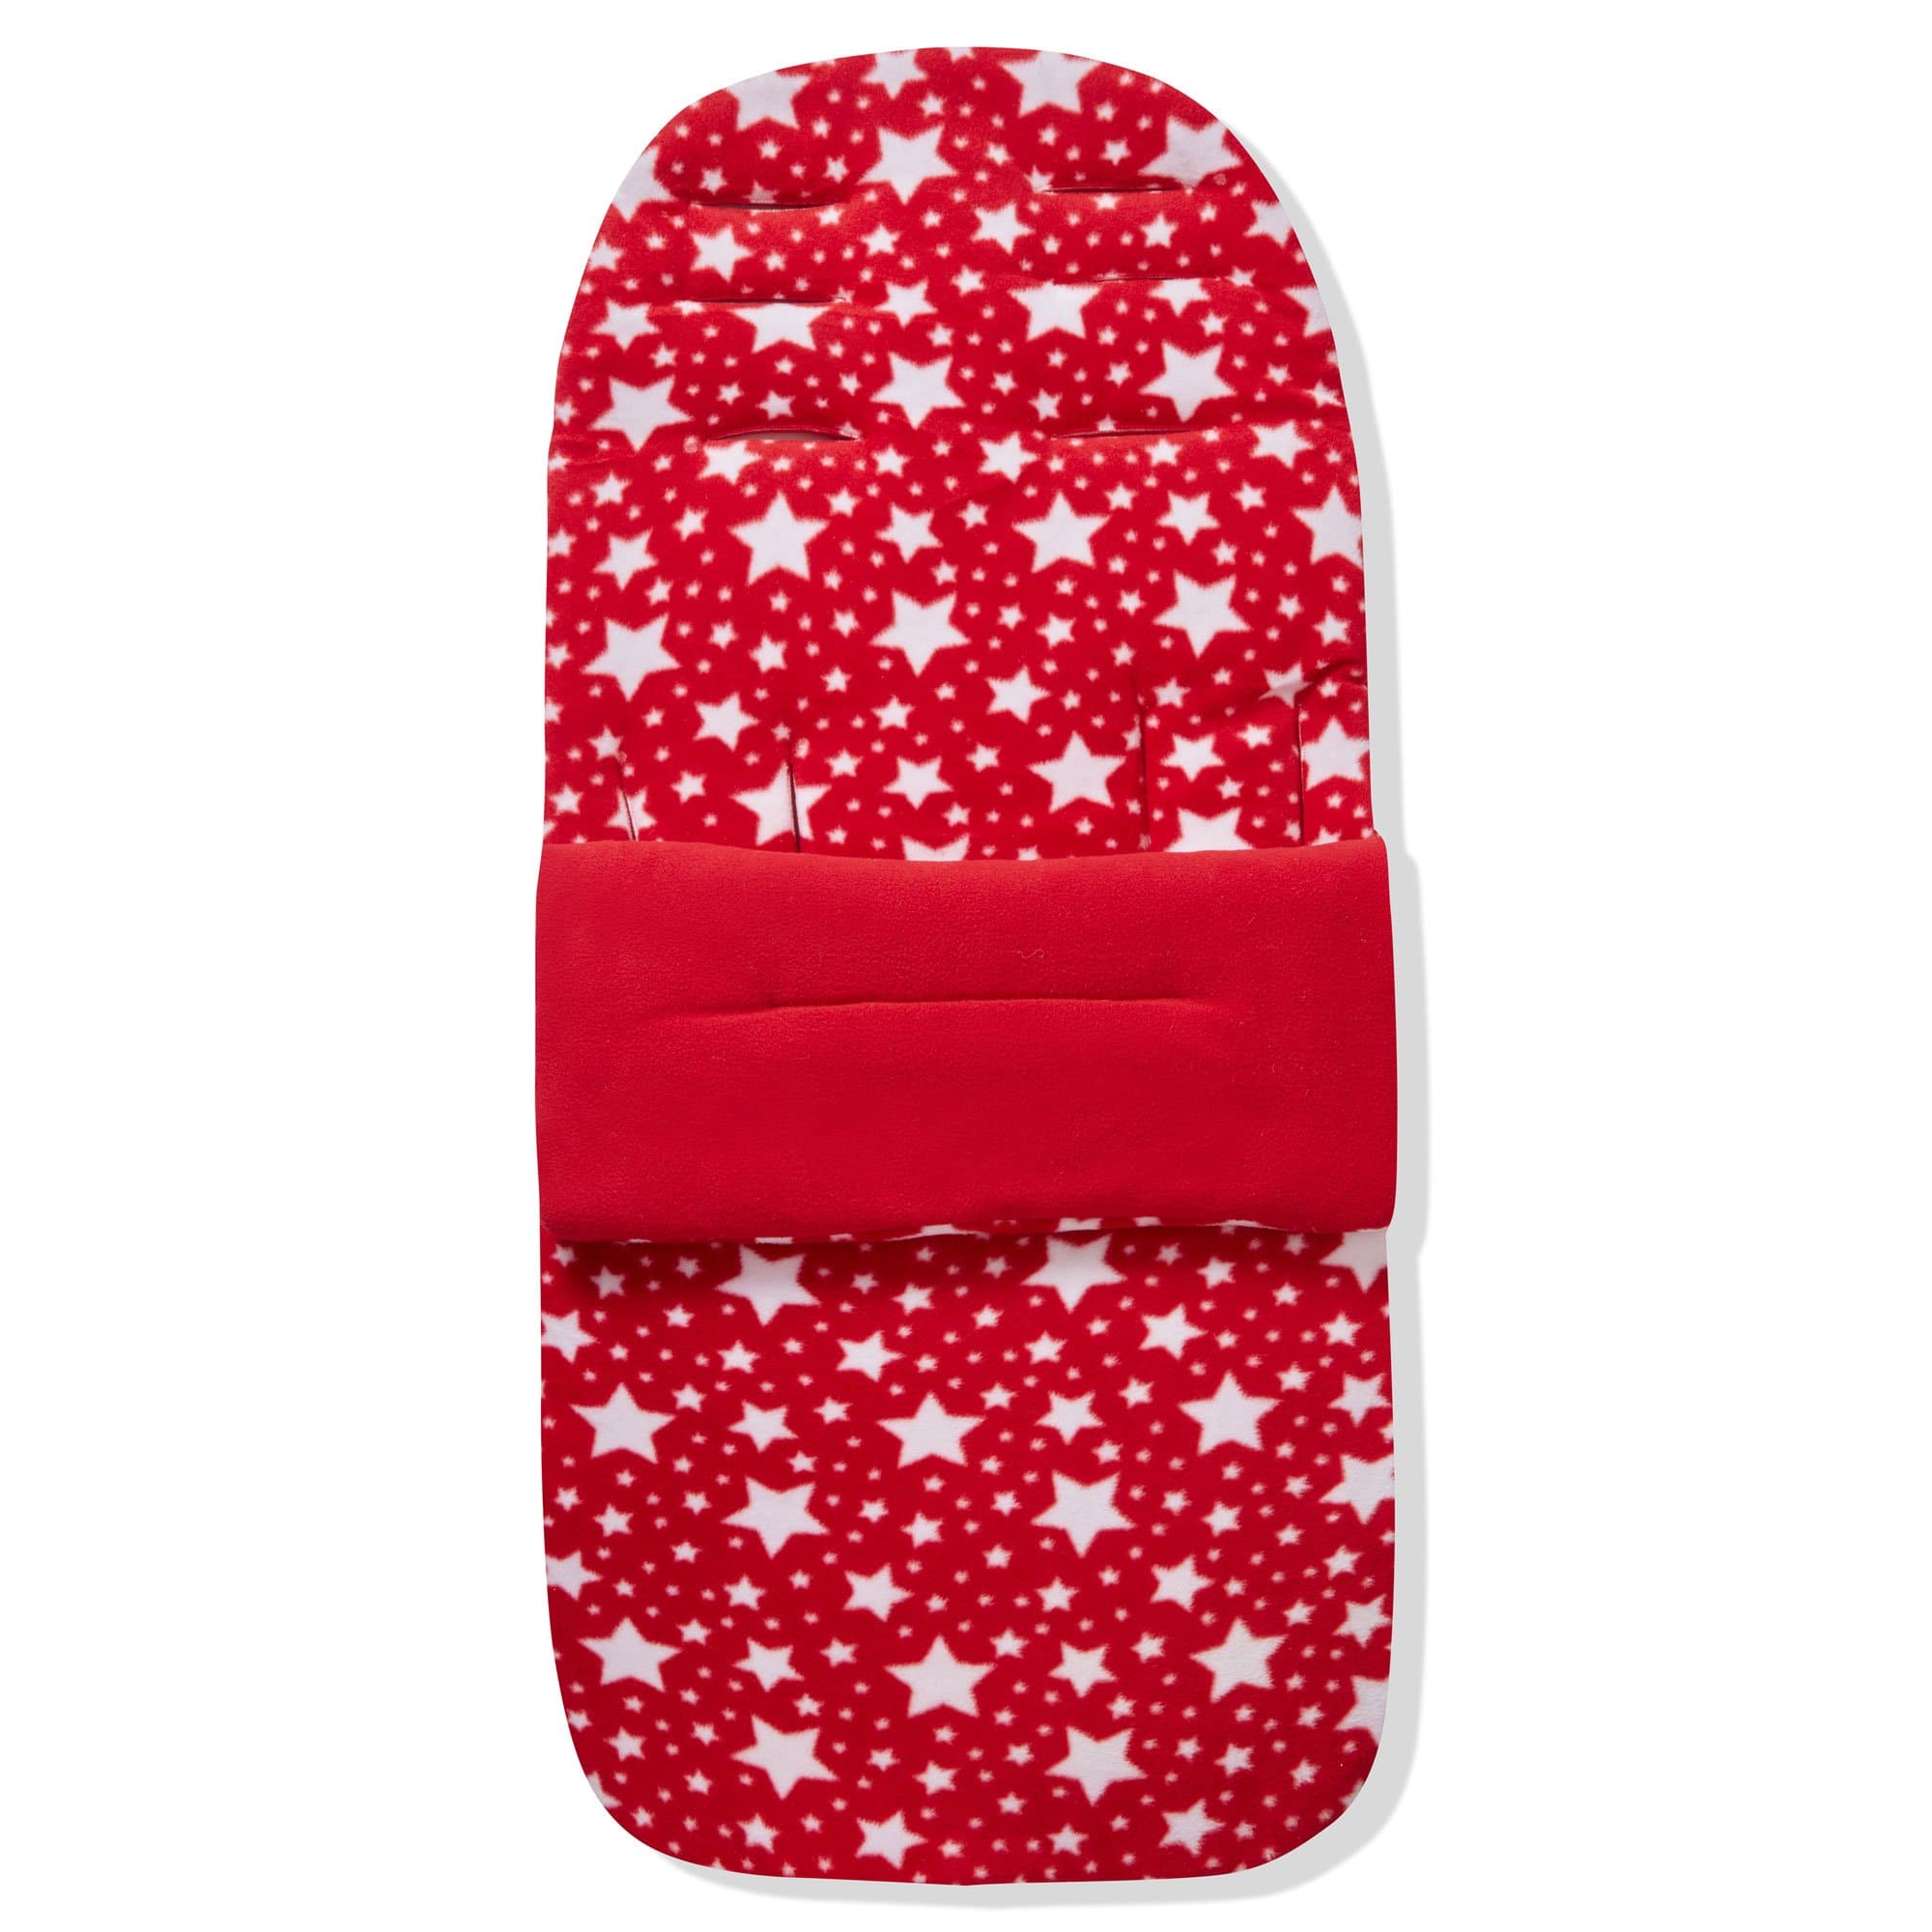 Fleece Footmuff / Cosy Toes Compatible with Petite - Red Star / Fits All Models | For Your Little One